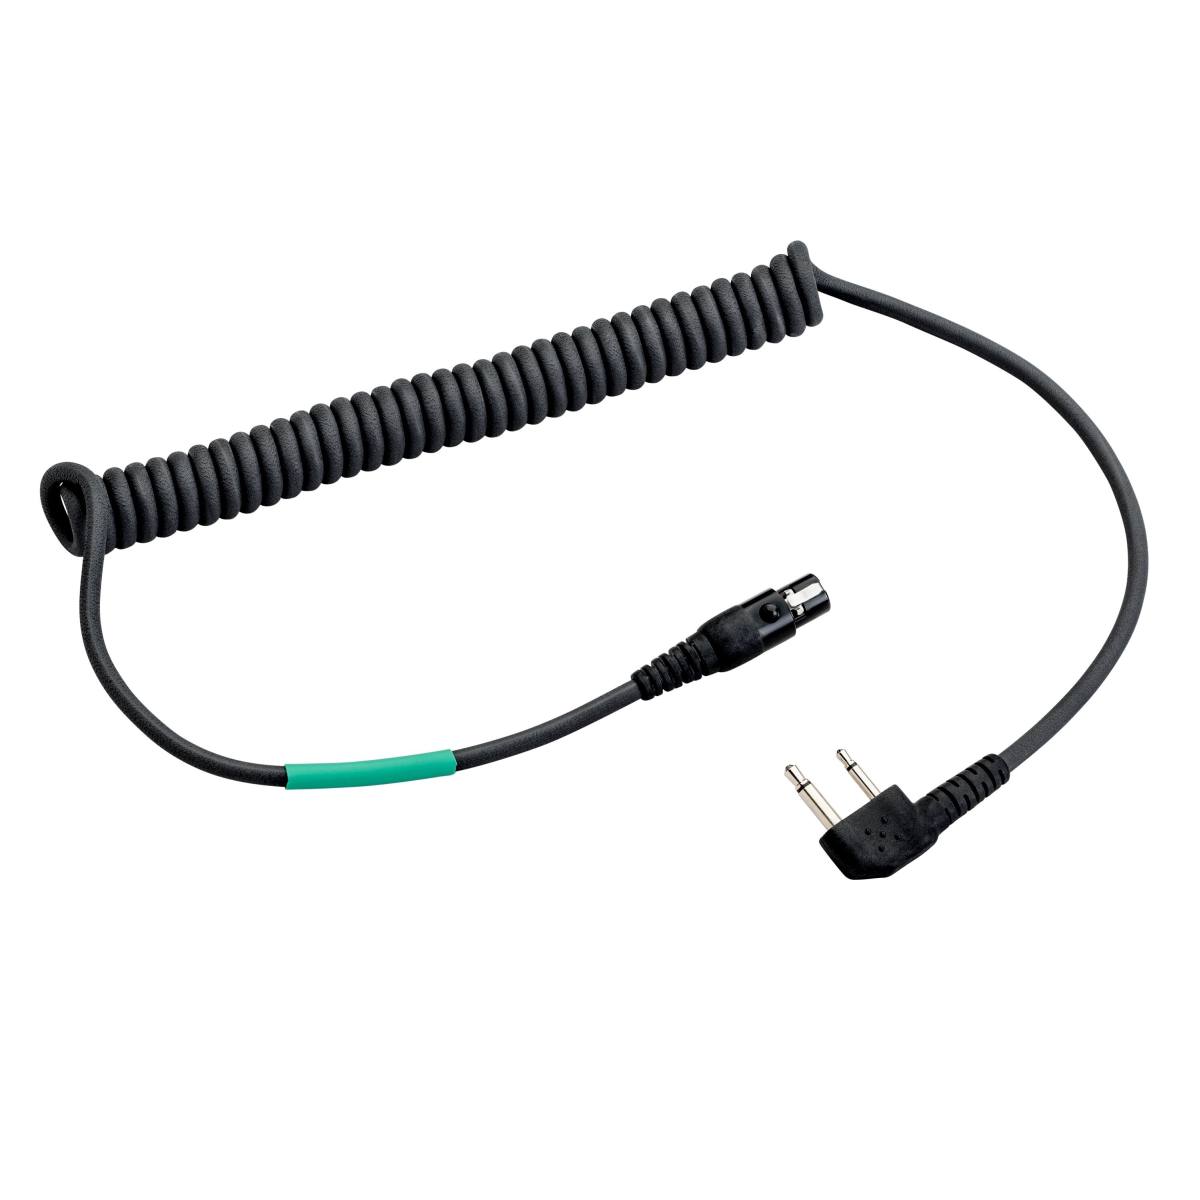 3M PELTOR FLX2 Cable Icom 2-Pin Angled, FLX2-35